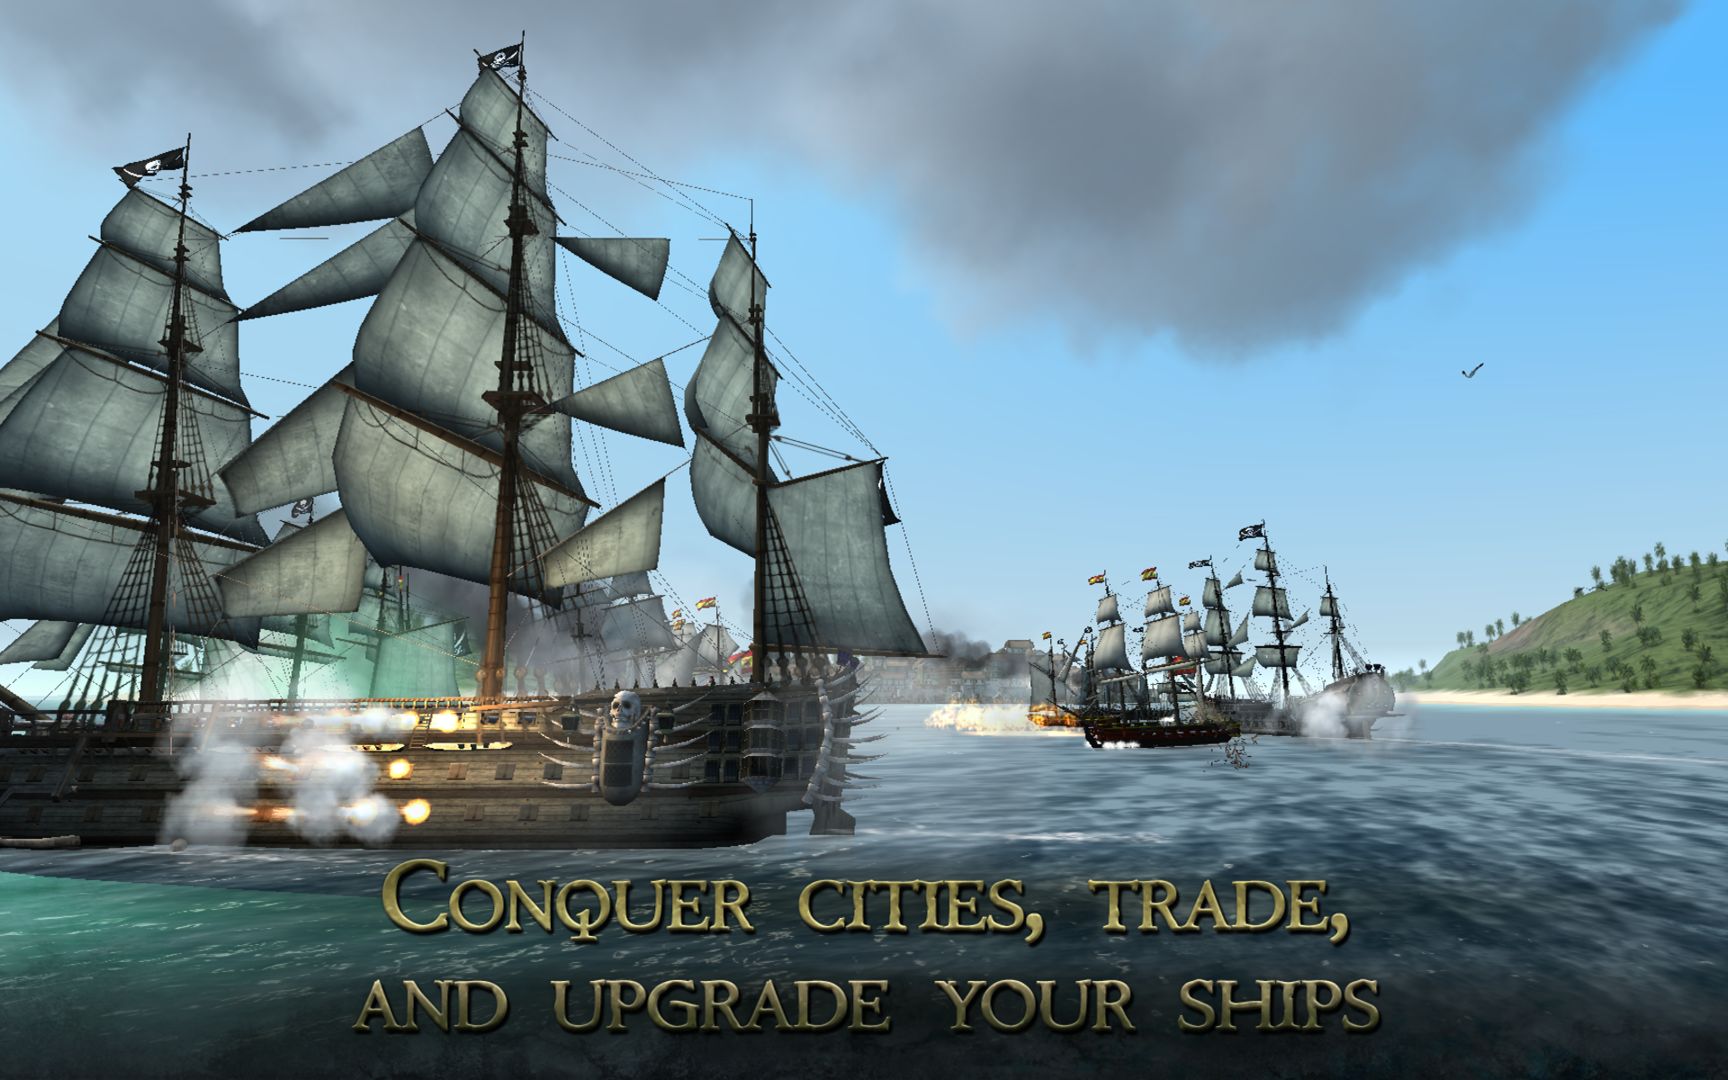 Screenshot of The Pirate: Plague of the Dead